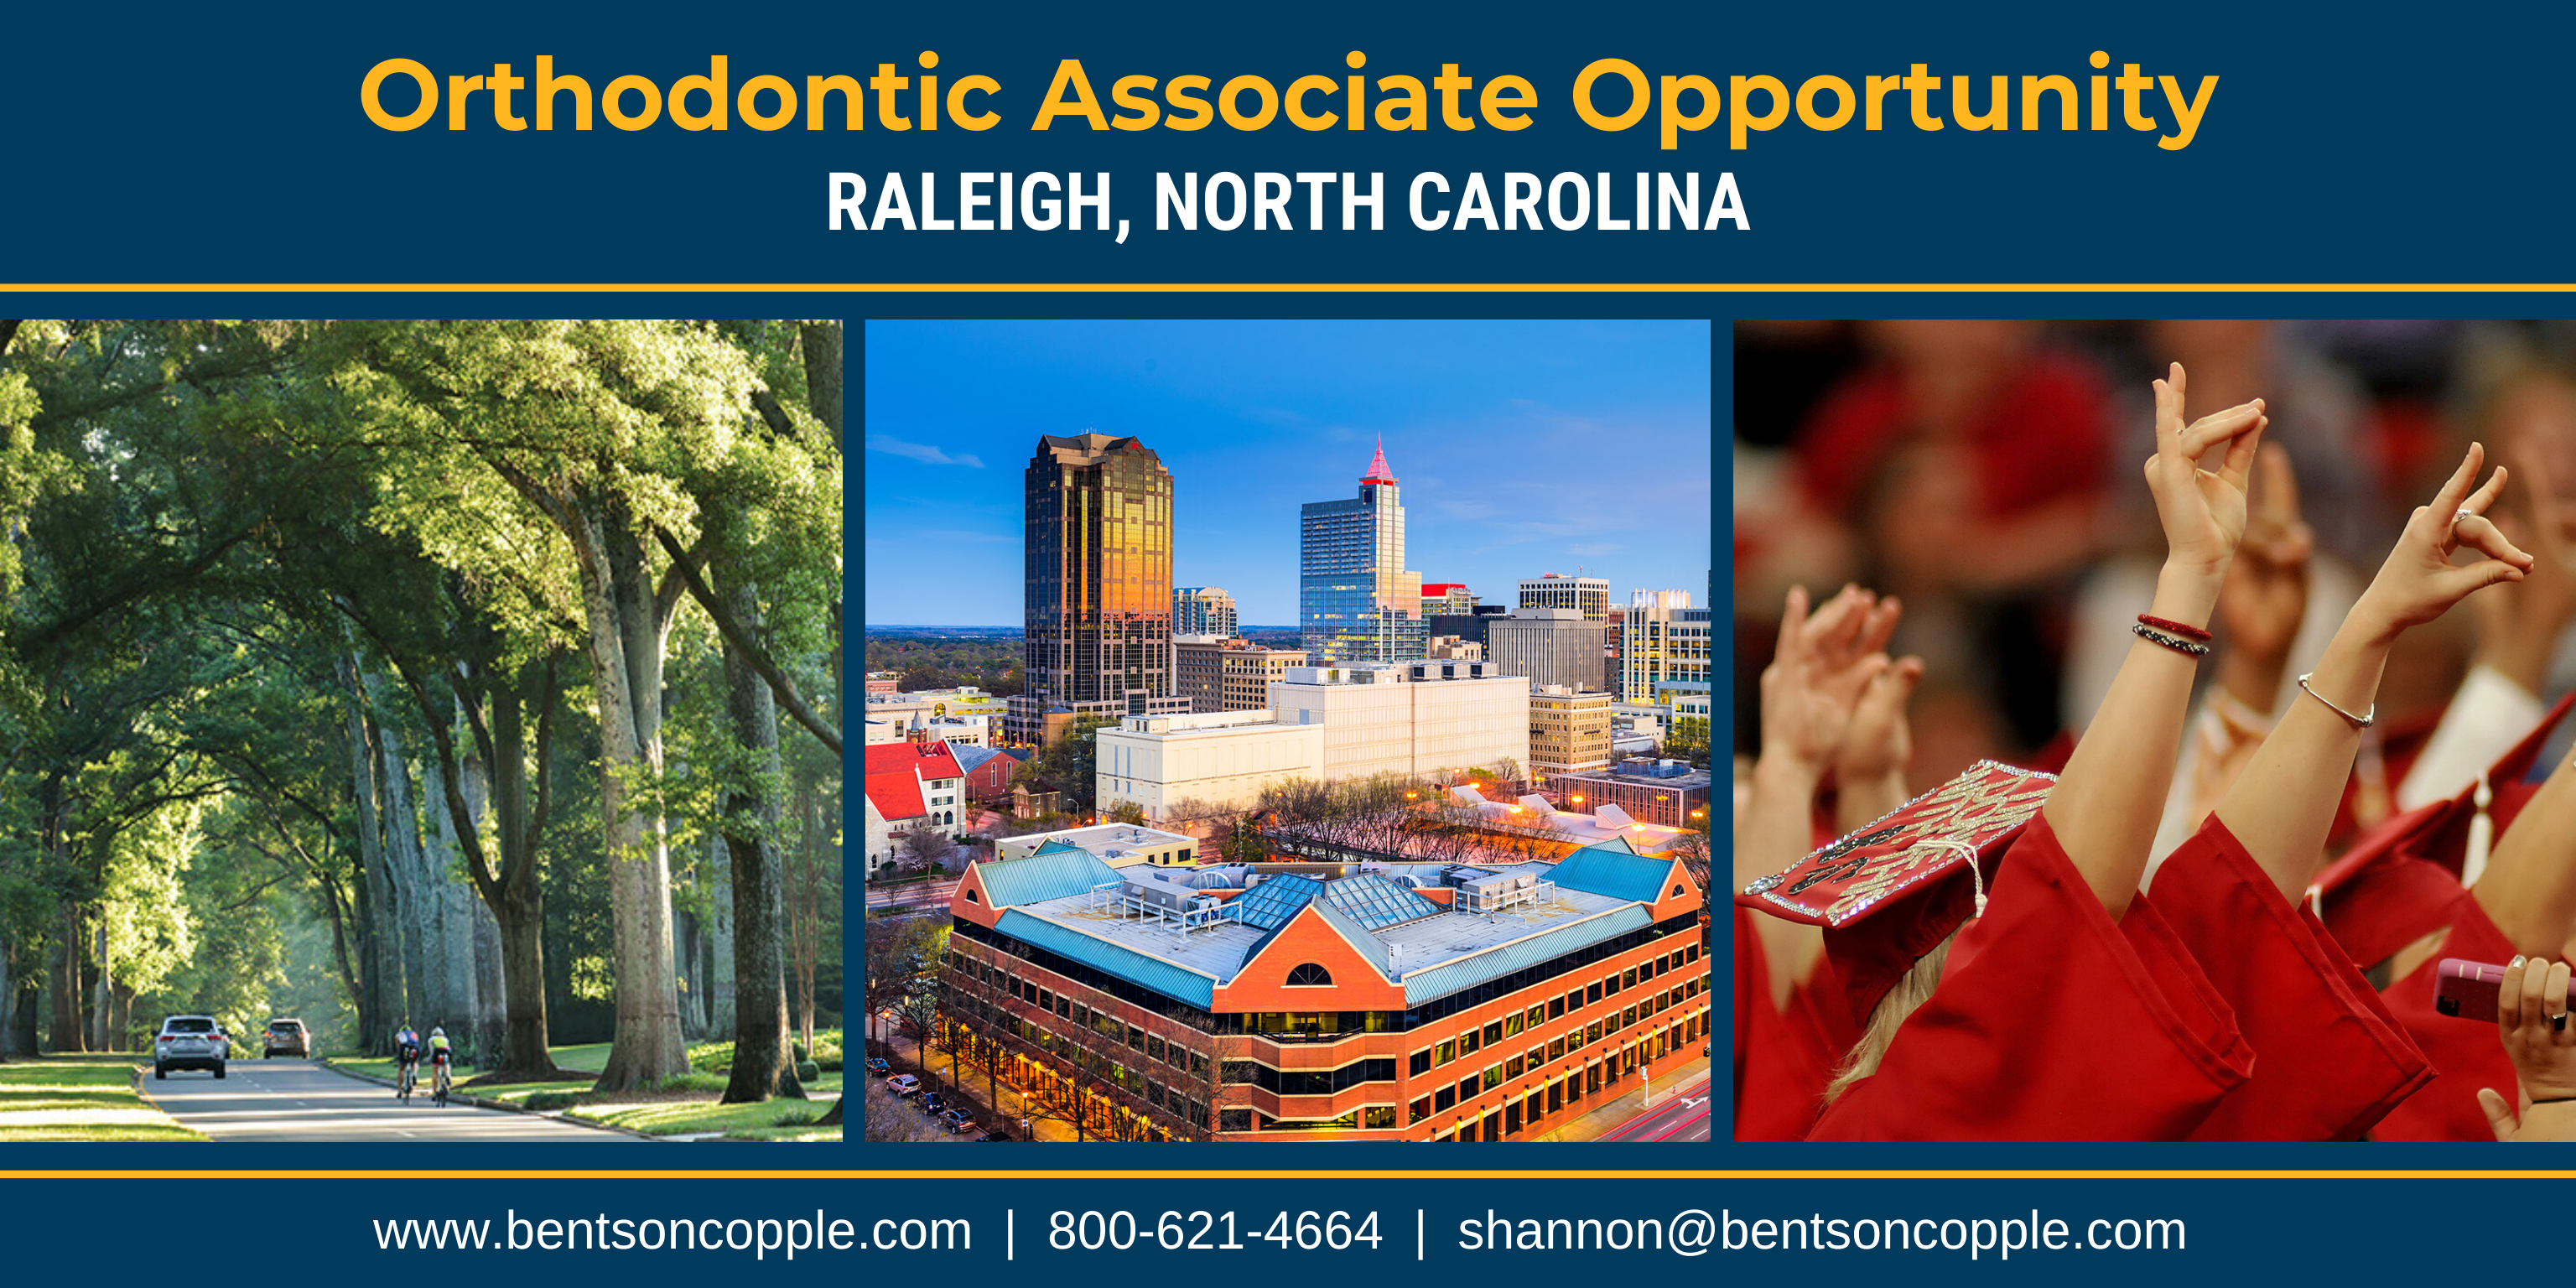 Raleigh_North_Carolina_Orthodontic_Associate_Opportunity